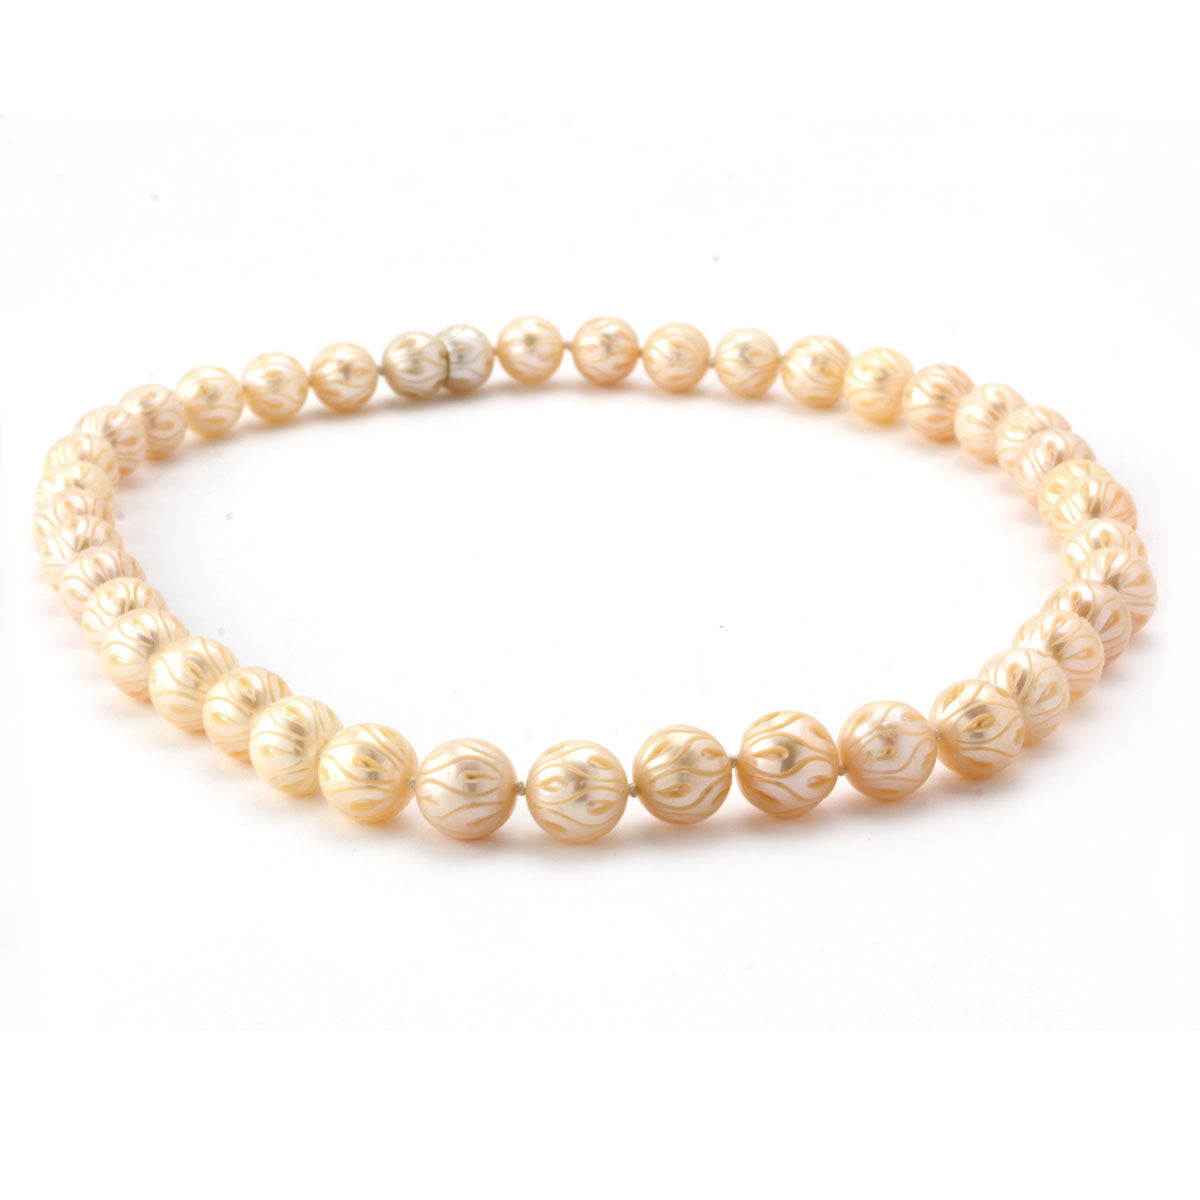 Galatea Carved Peach Pearl Necklace-343725